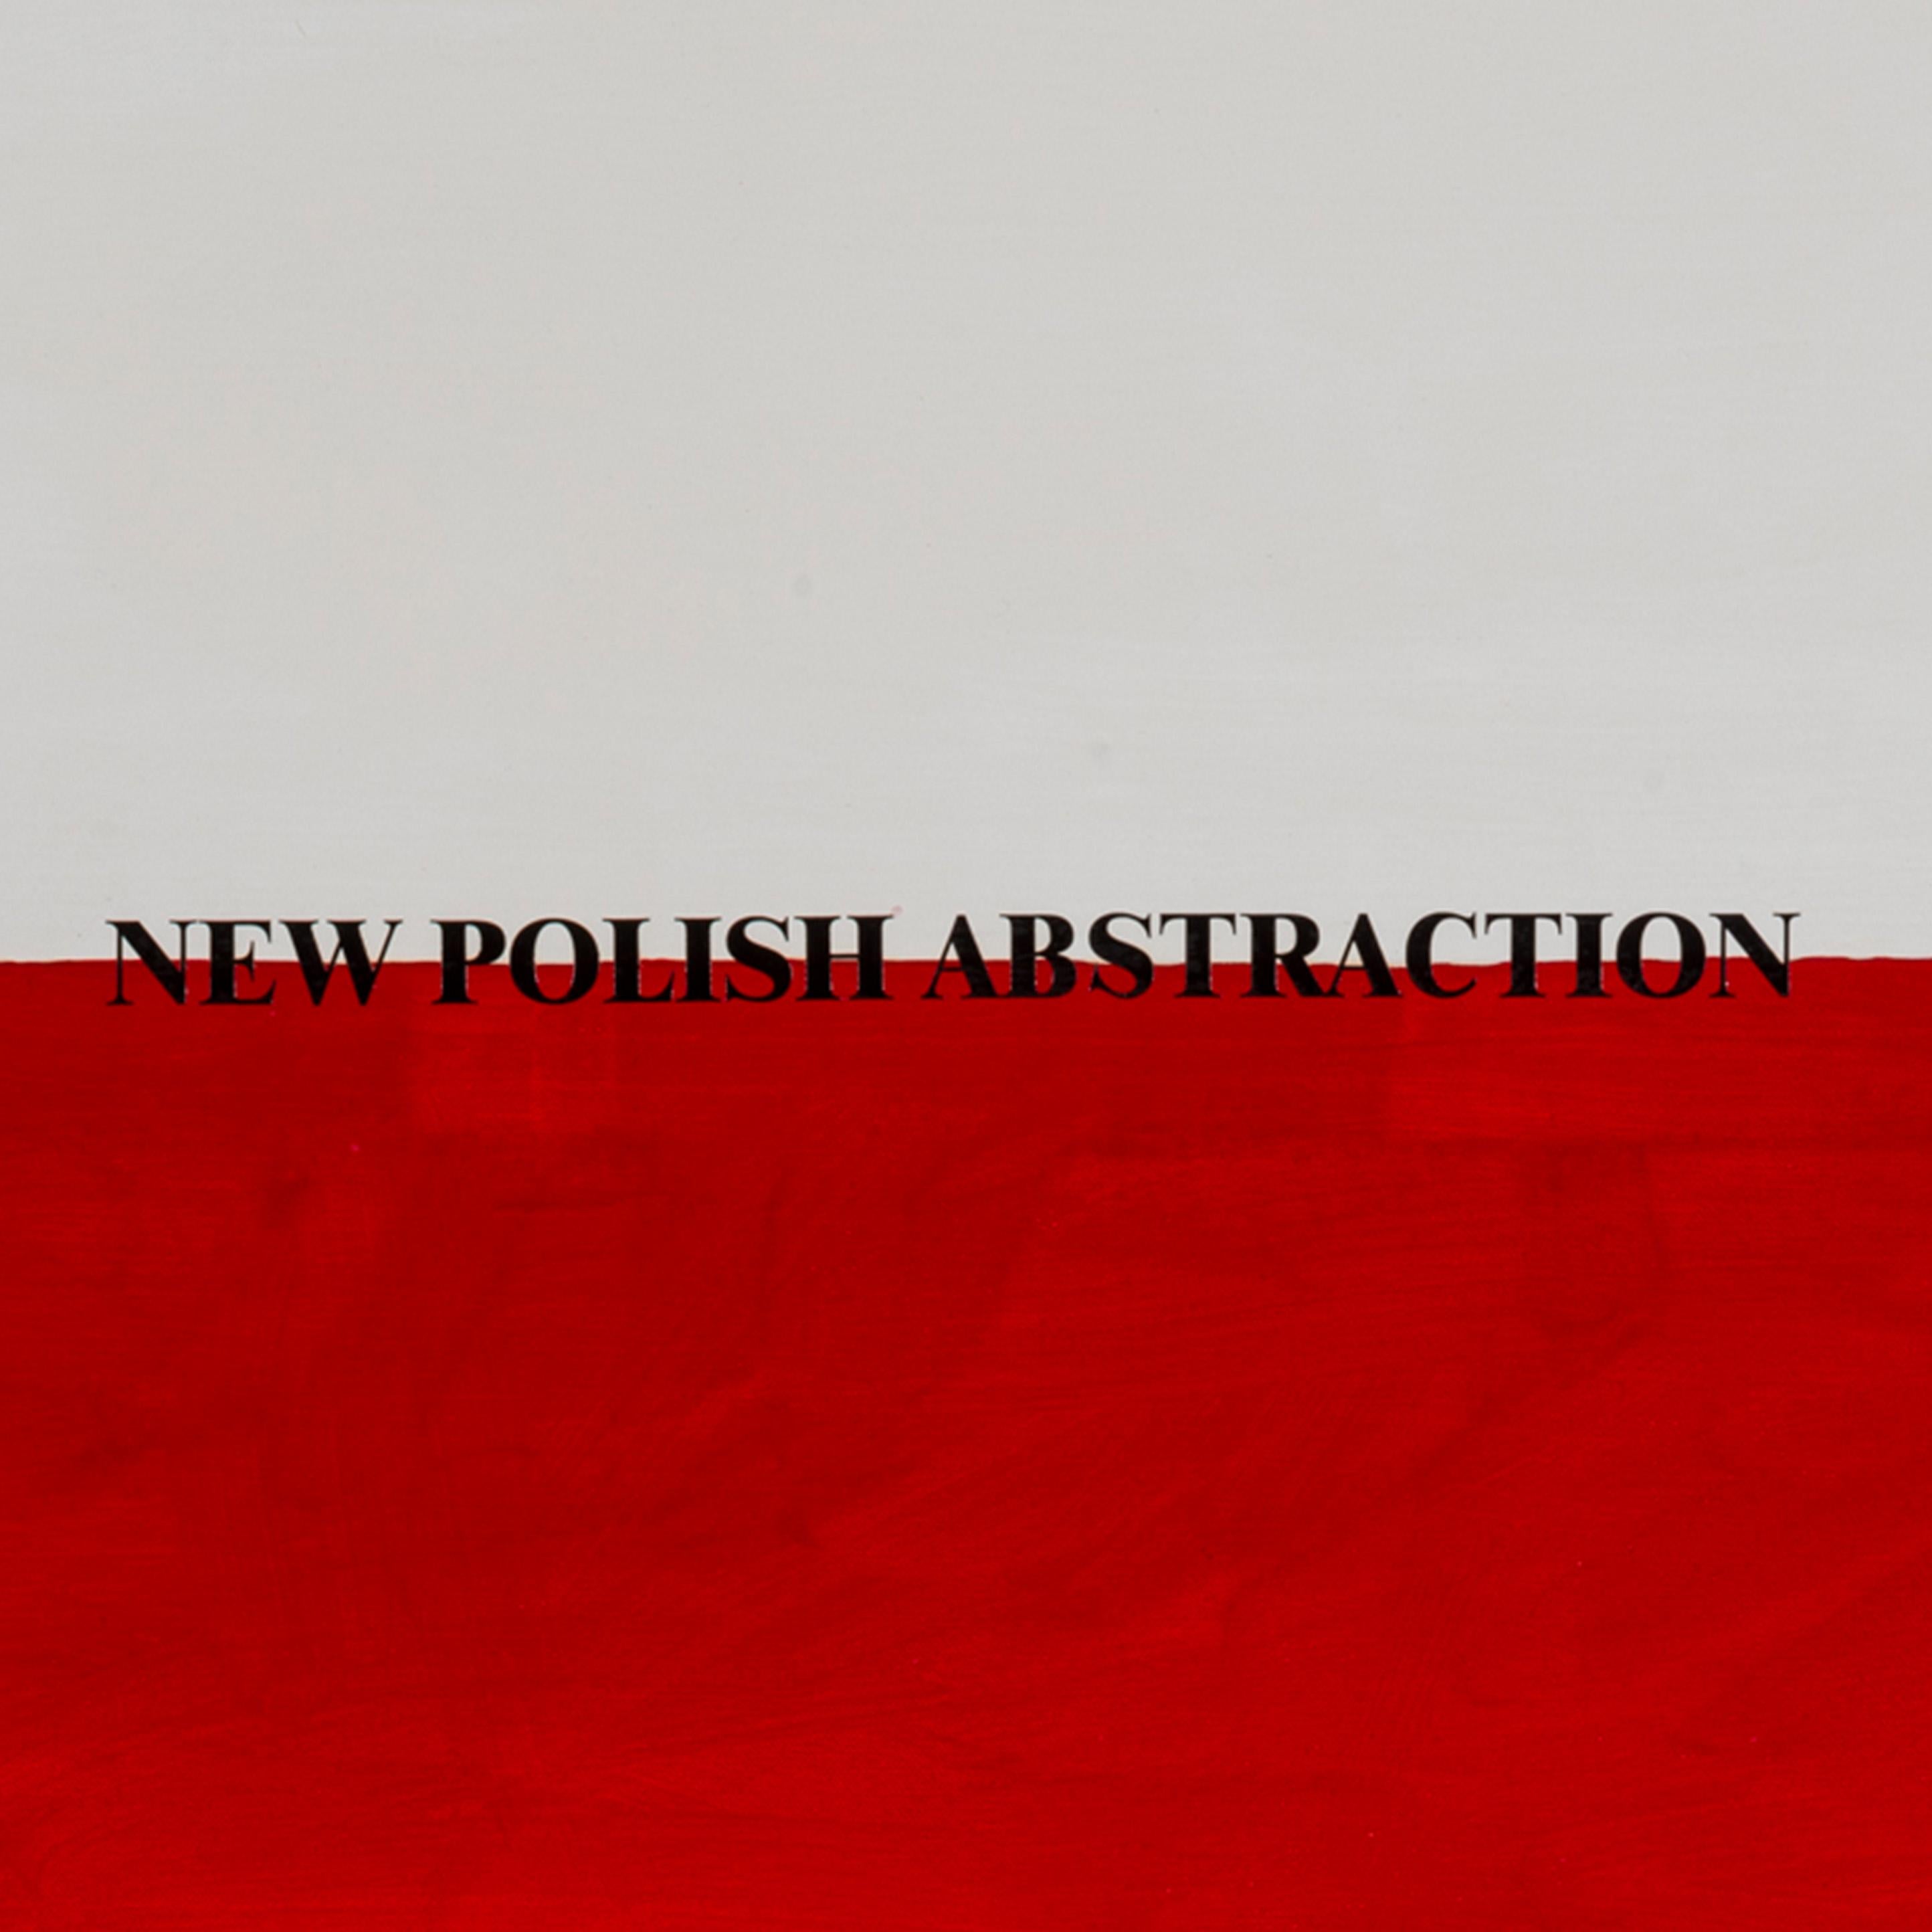 New Polish Abstraction, 1972-2002, Acrylic on canvas, Flags, Visual Poetry - Red Abstract Painting by Sarenco